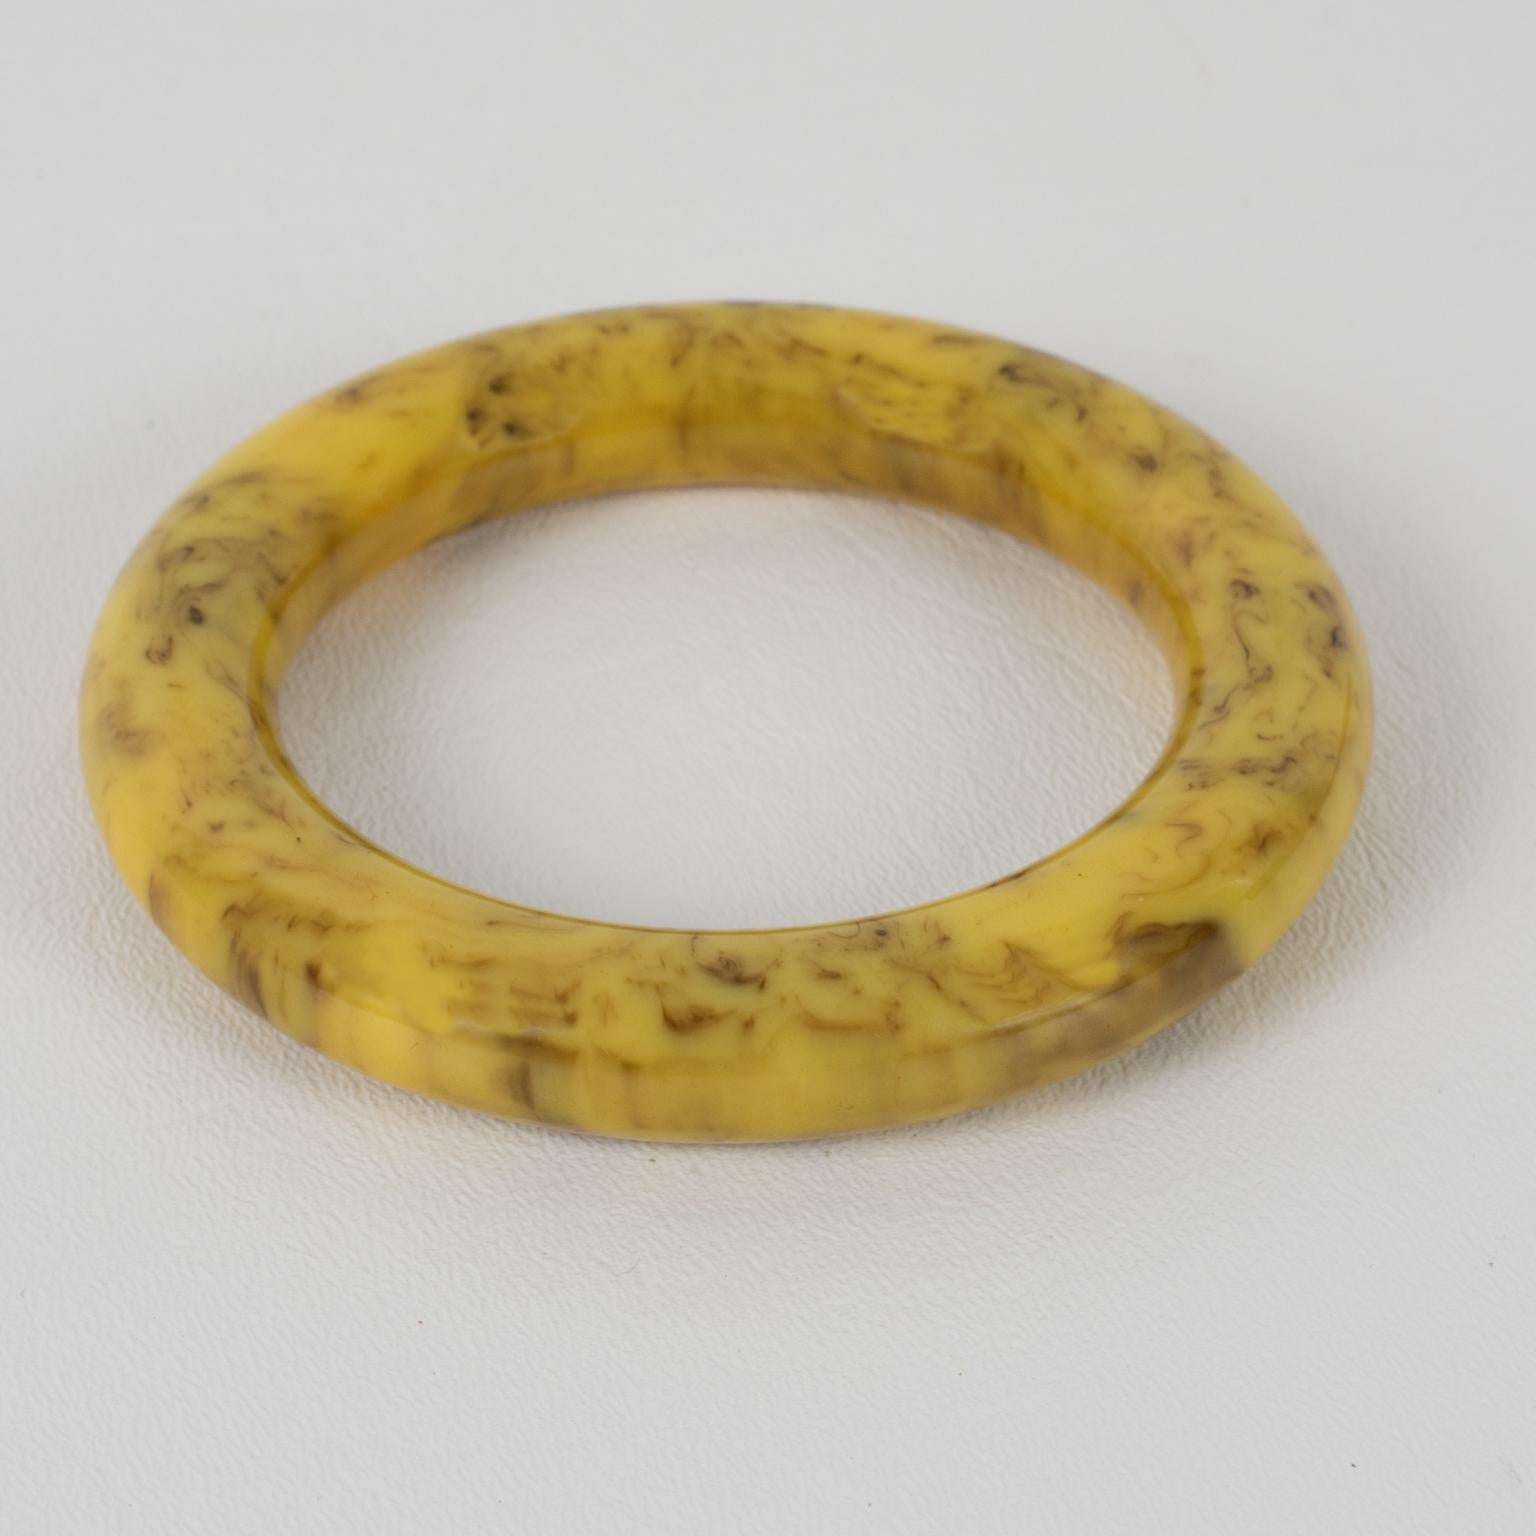 This lovely vanilla and chocolate marble Bakelite bracelet bangle features a chunky tube shape with an intense yellow vanilla custard tone and cloudy chocolate brown swirling. 
Measurements: Inside across is 2.50 in diameter (6.3 cm) - outside